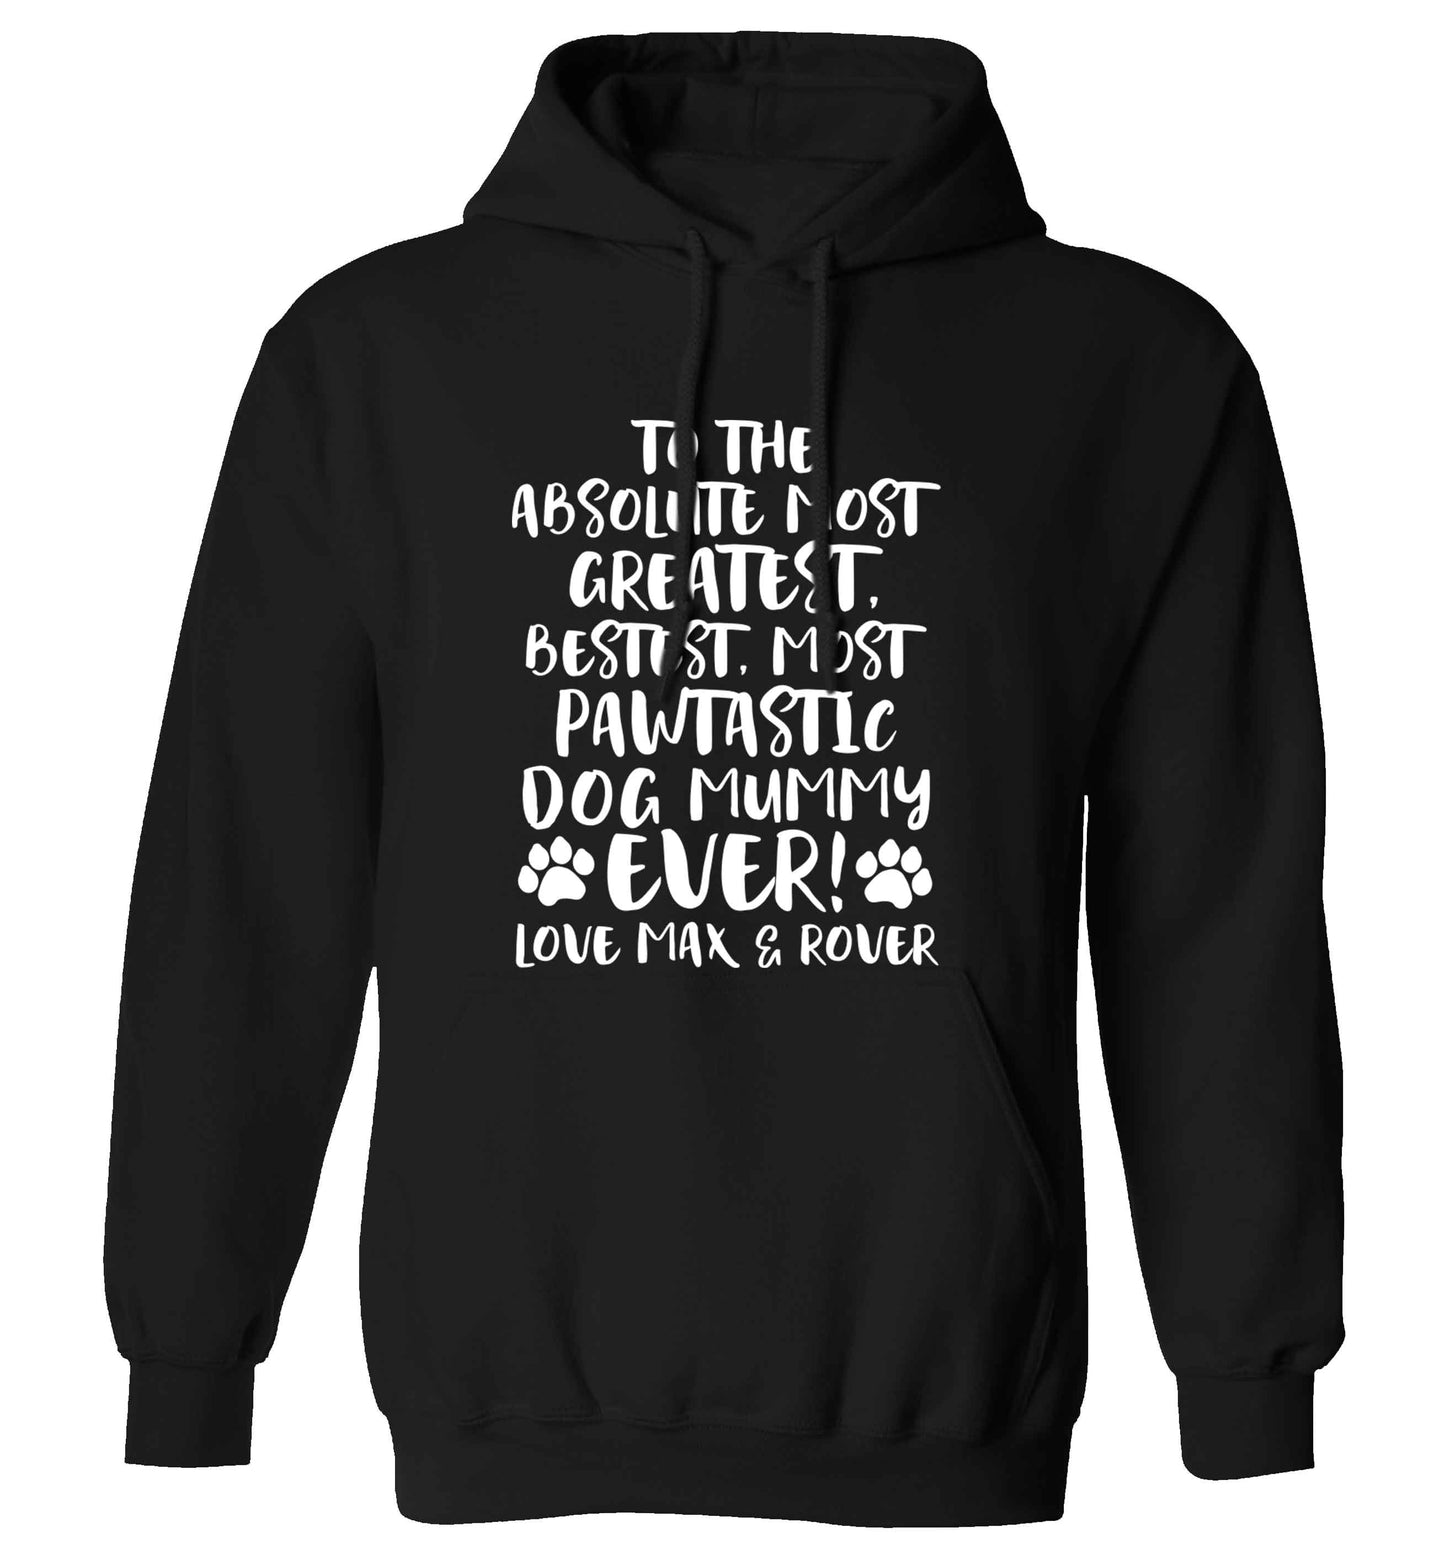 Personalsied to the most pawtastic dog mummy ever adults unisex black hoodie 2XL